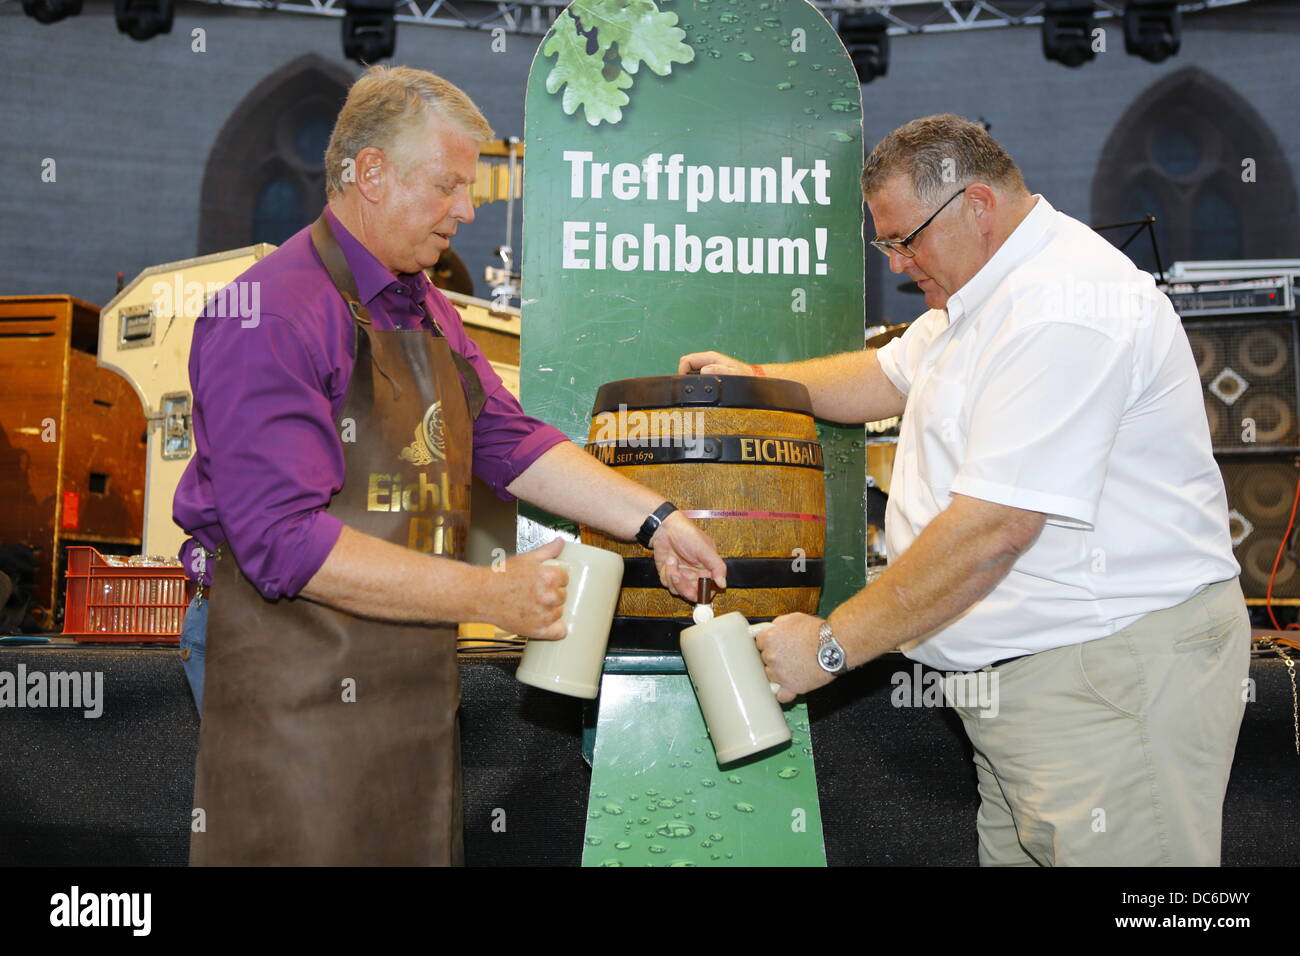 Worms, Germany. 9th August 2013. The Lord Mayor of Worms, Michael Kissel (L), taps a keg of beer for the representative of the Eichbaum brewery (R). The Lord Mayor of Worms, Michael Kissel, opened the Jazz & Joy Festival 2013 with a traditional keg-tapping ceremony. The Jazz & Joy Festival runs for three days in the shadow of the Cathedral of Worms. Credit:  Michael Debets/Alamy Live News Stock Photo